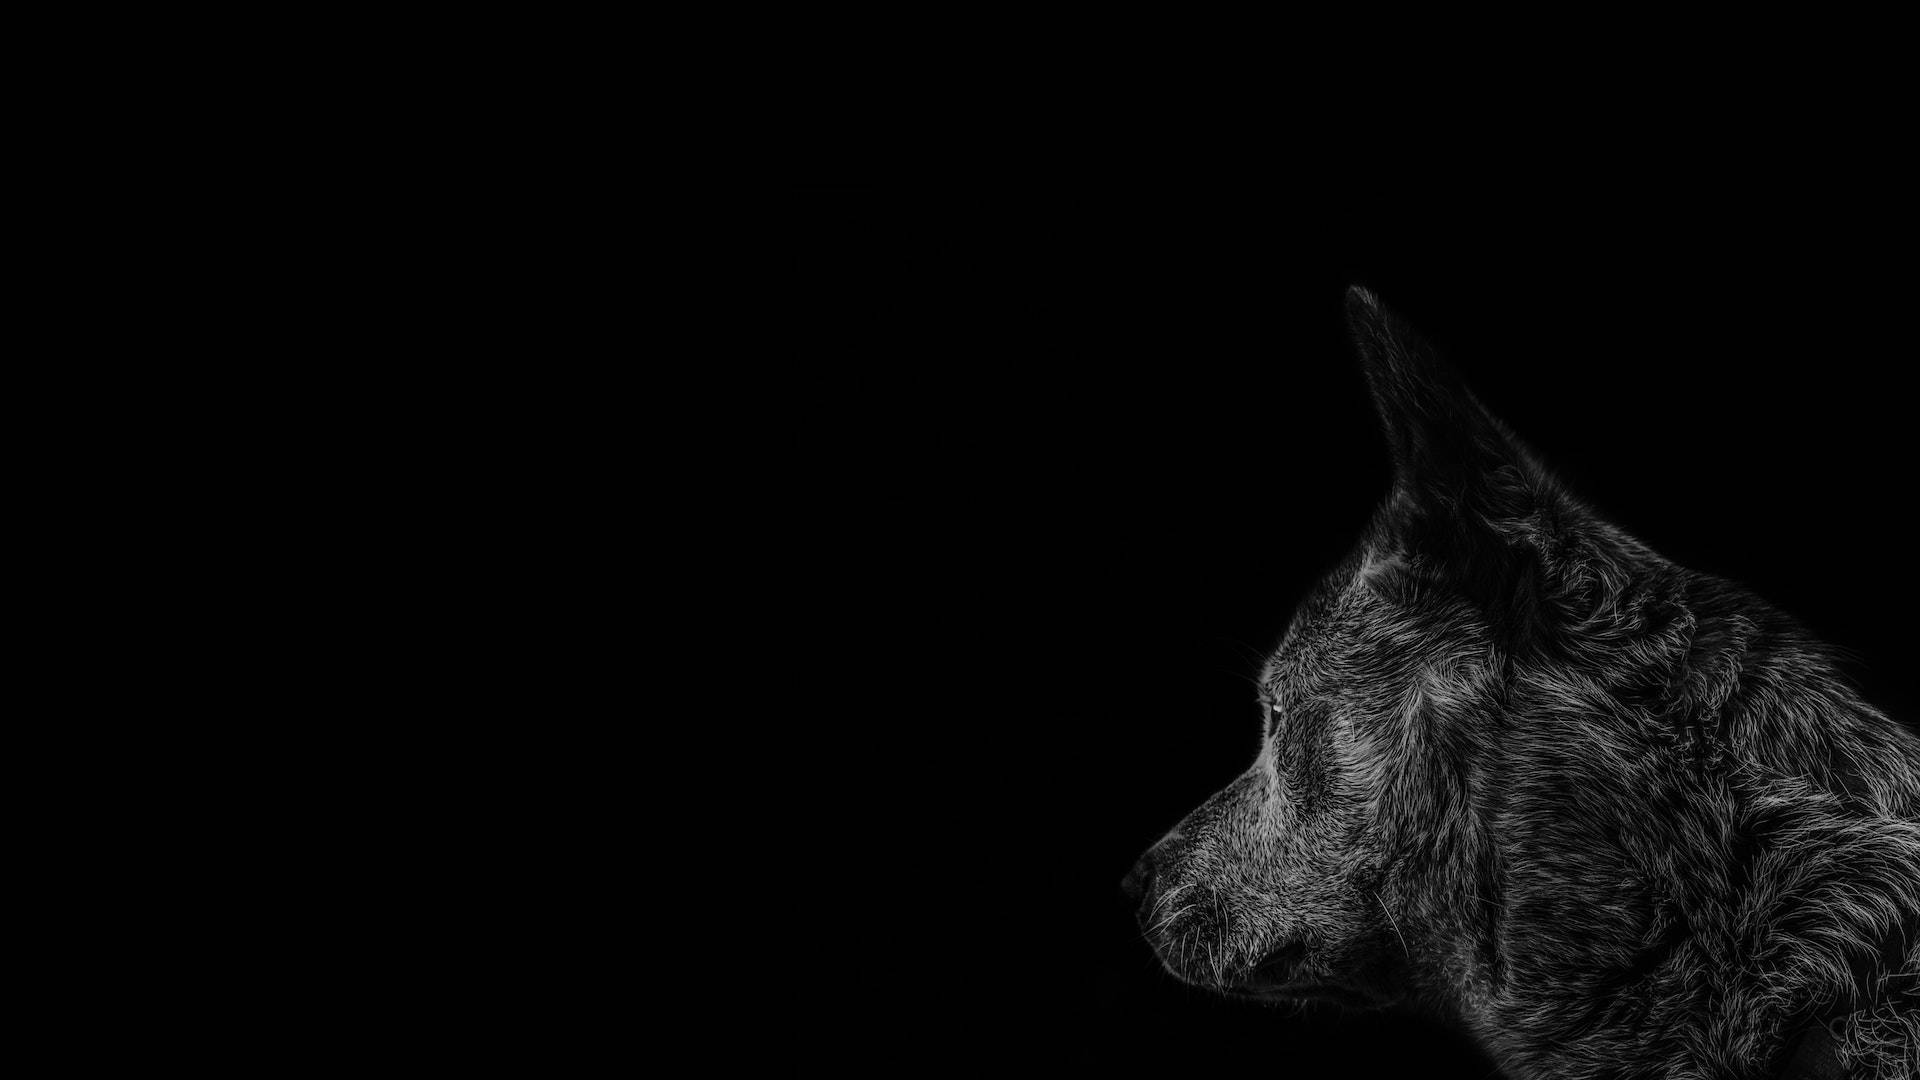 Monochromatic Aesthetic - Black Pc And Gray Timber Dog Background